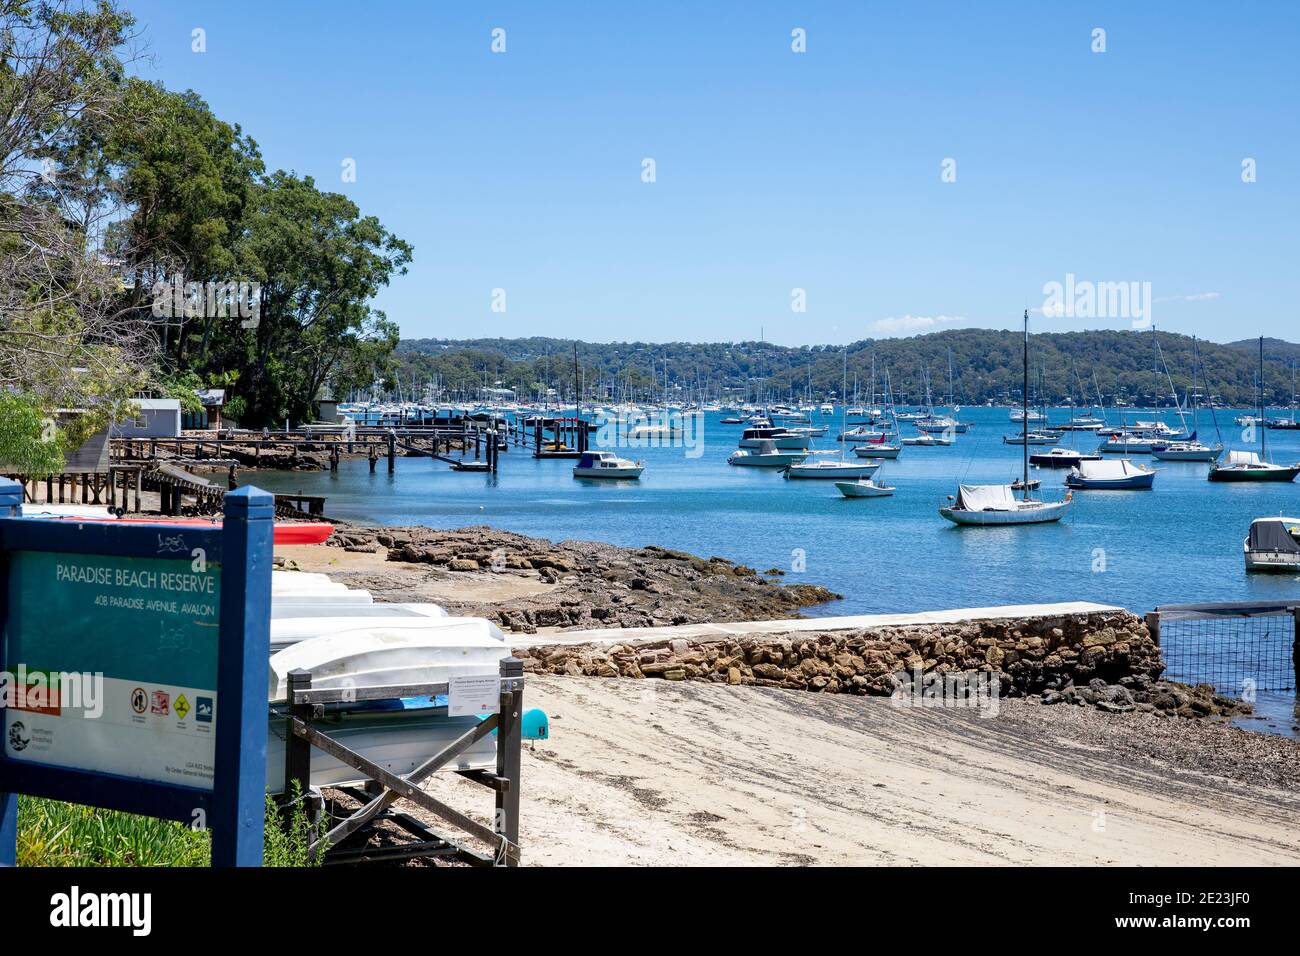 Paradise Beach in Sydney and view of boats and yachts moored on Pittwater,Sydney,Australia Stock Photo